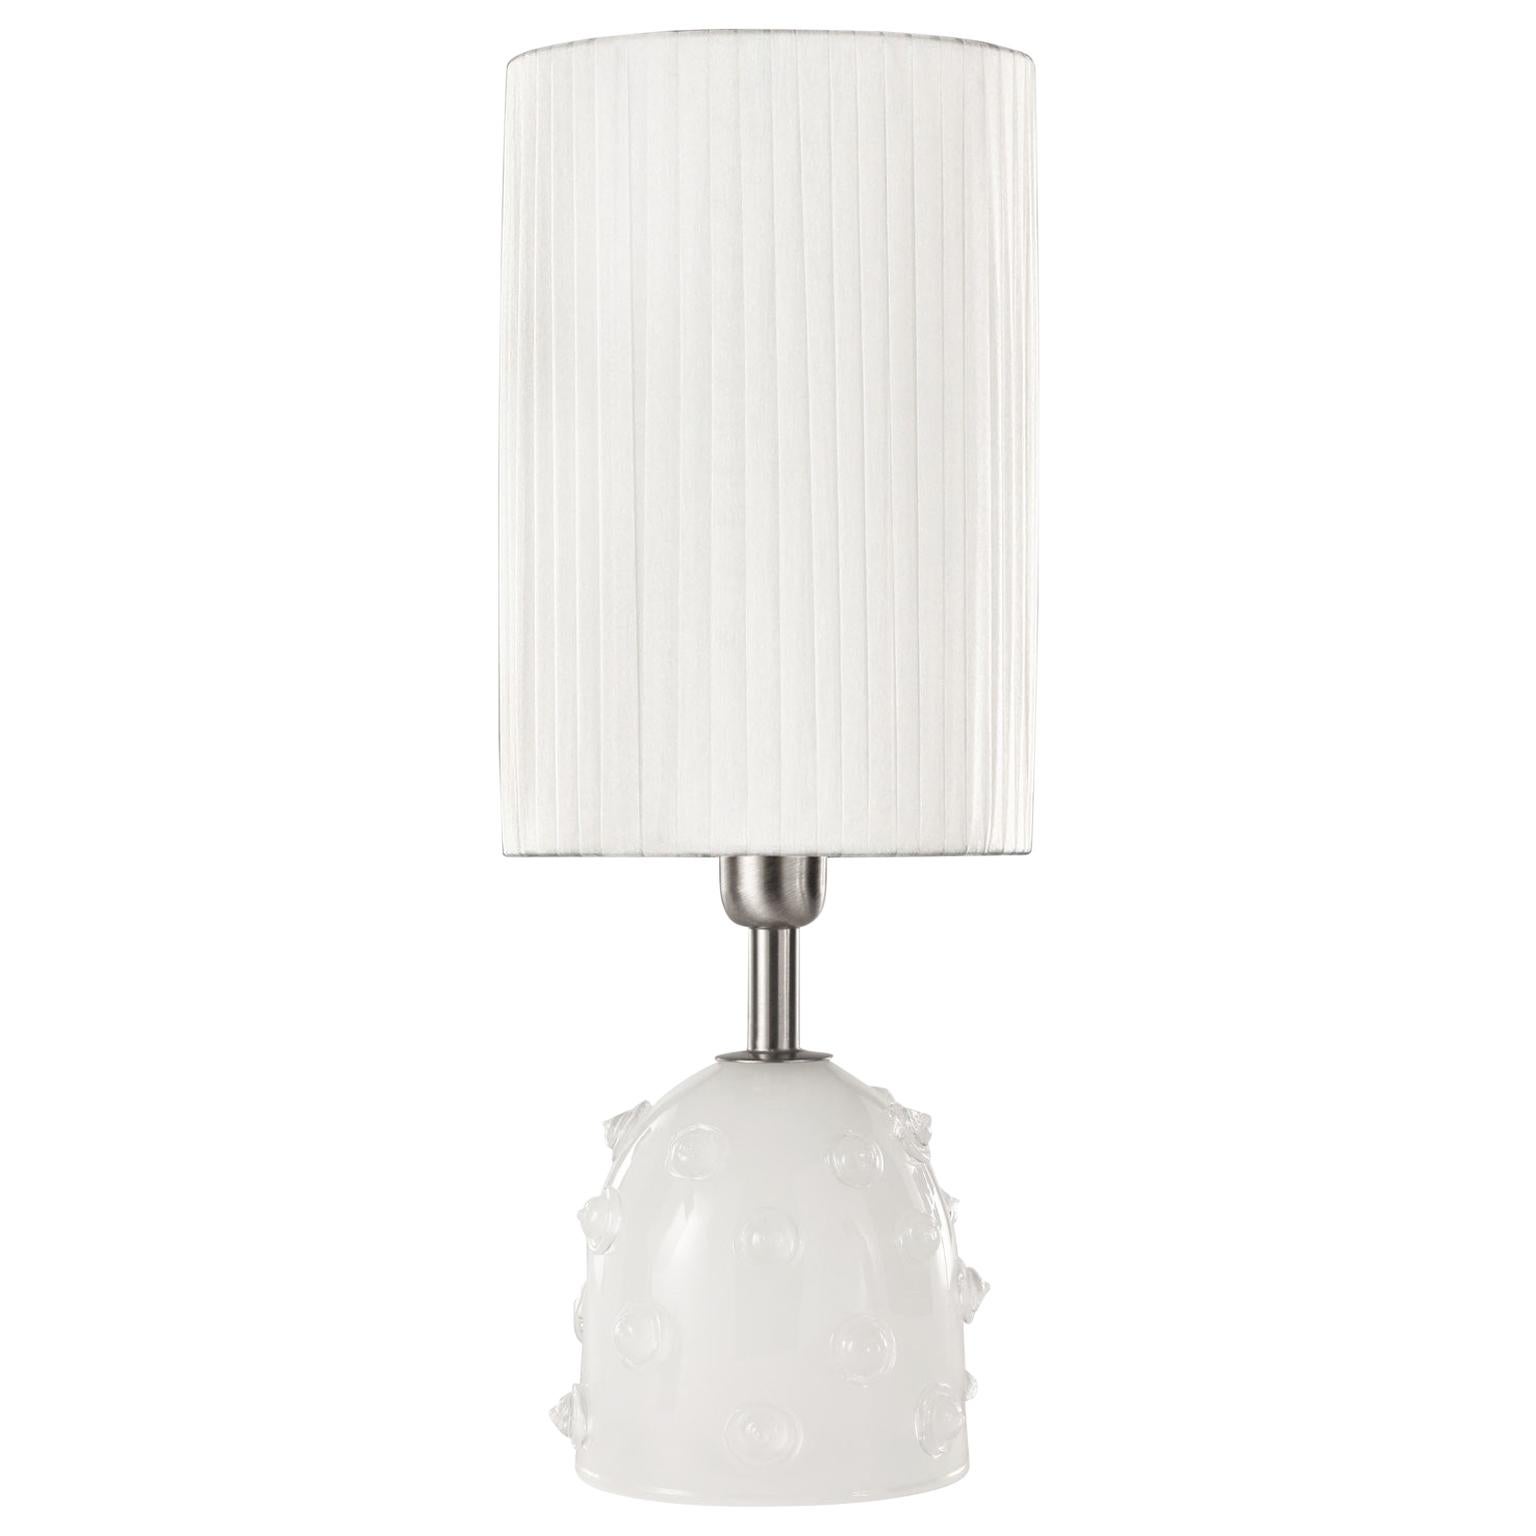 Artistic Table Lamp Silk Glass Clear “Borchie” Grey Lampshade by Multiforme For Sale